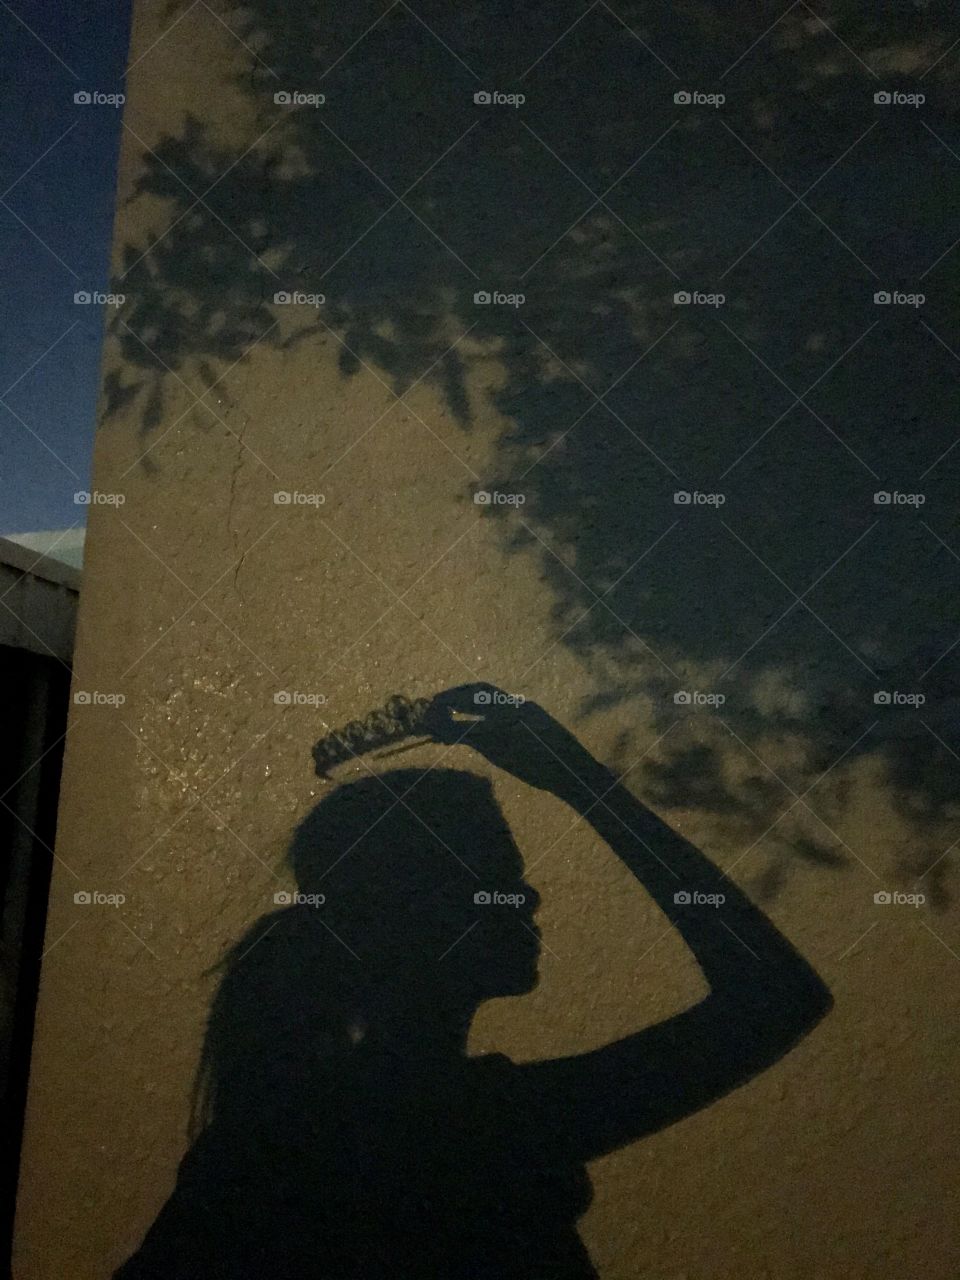 Shadow of a girl raising her crown with the silhouette of trees.